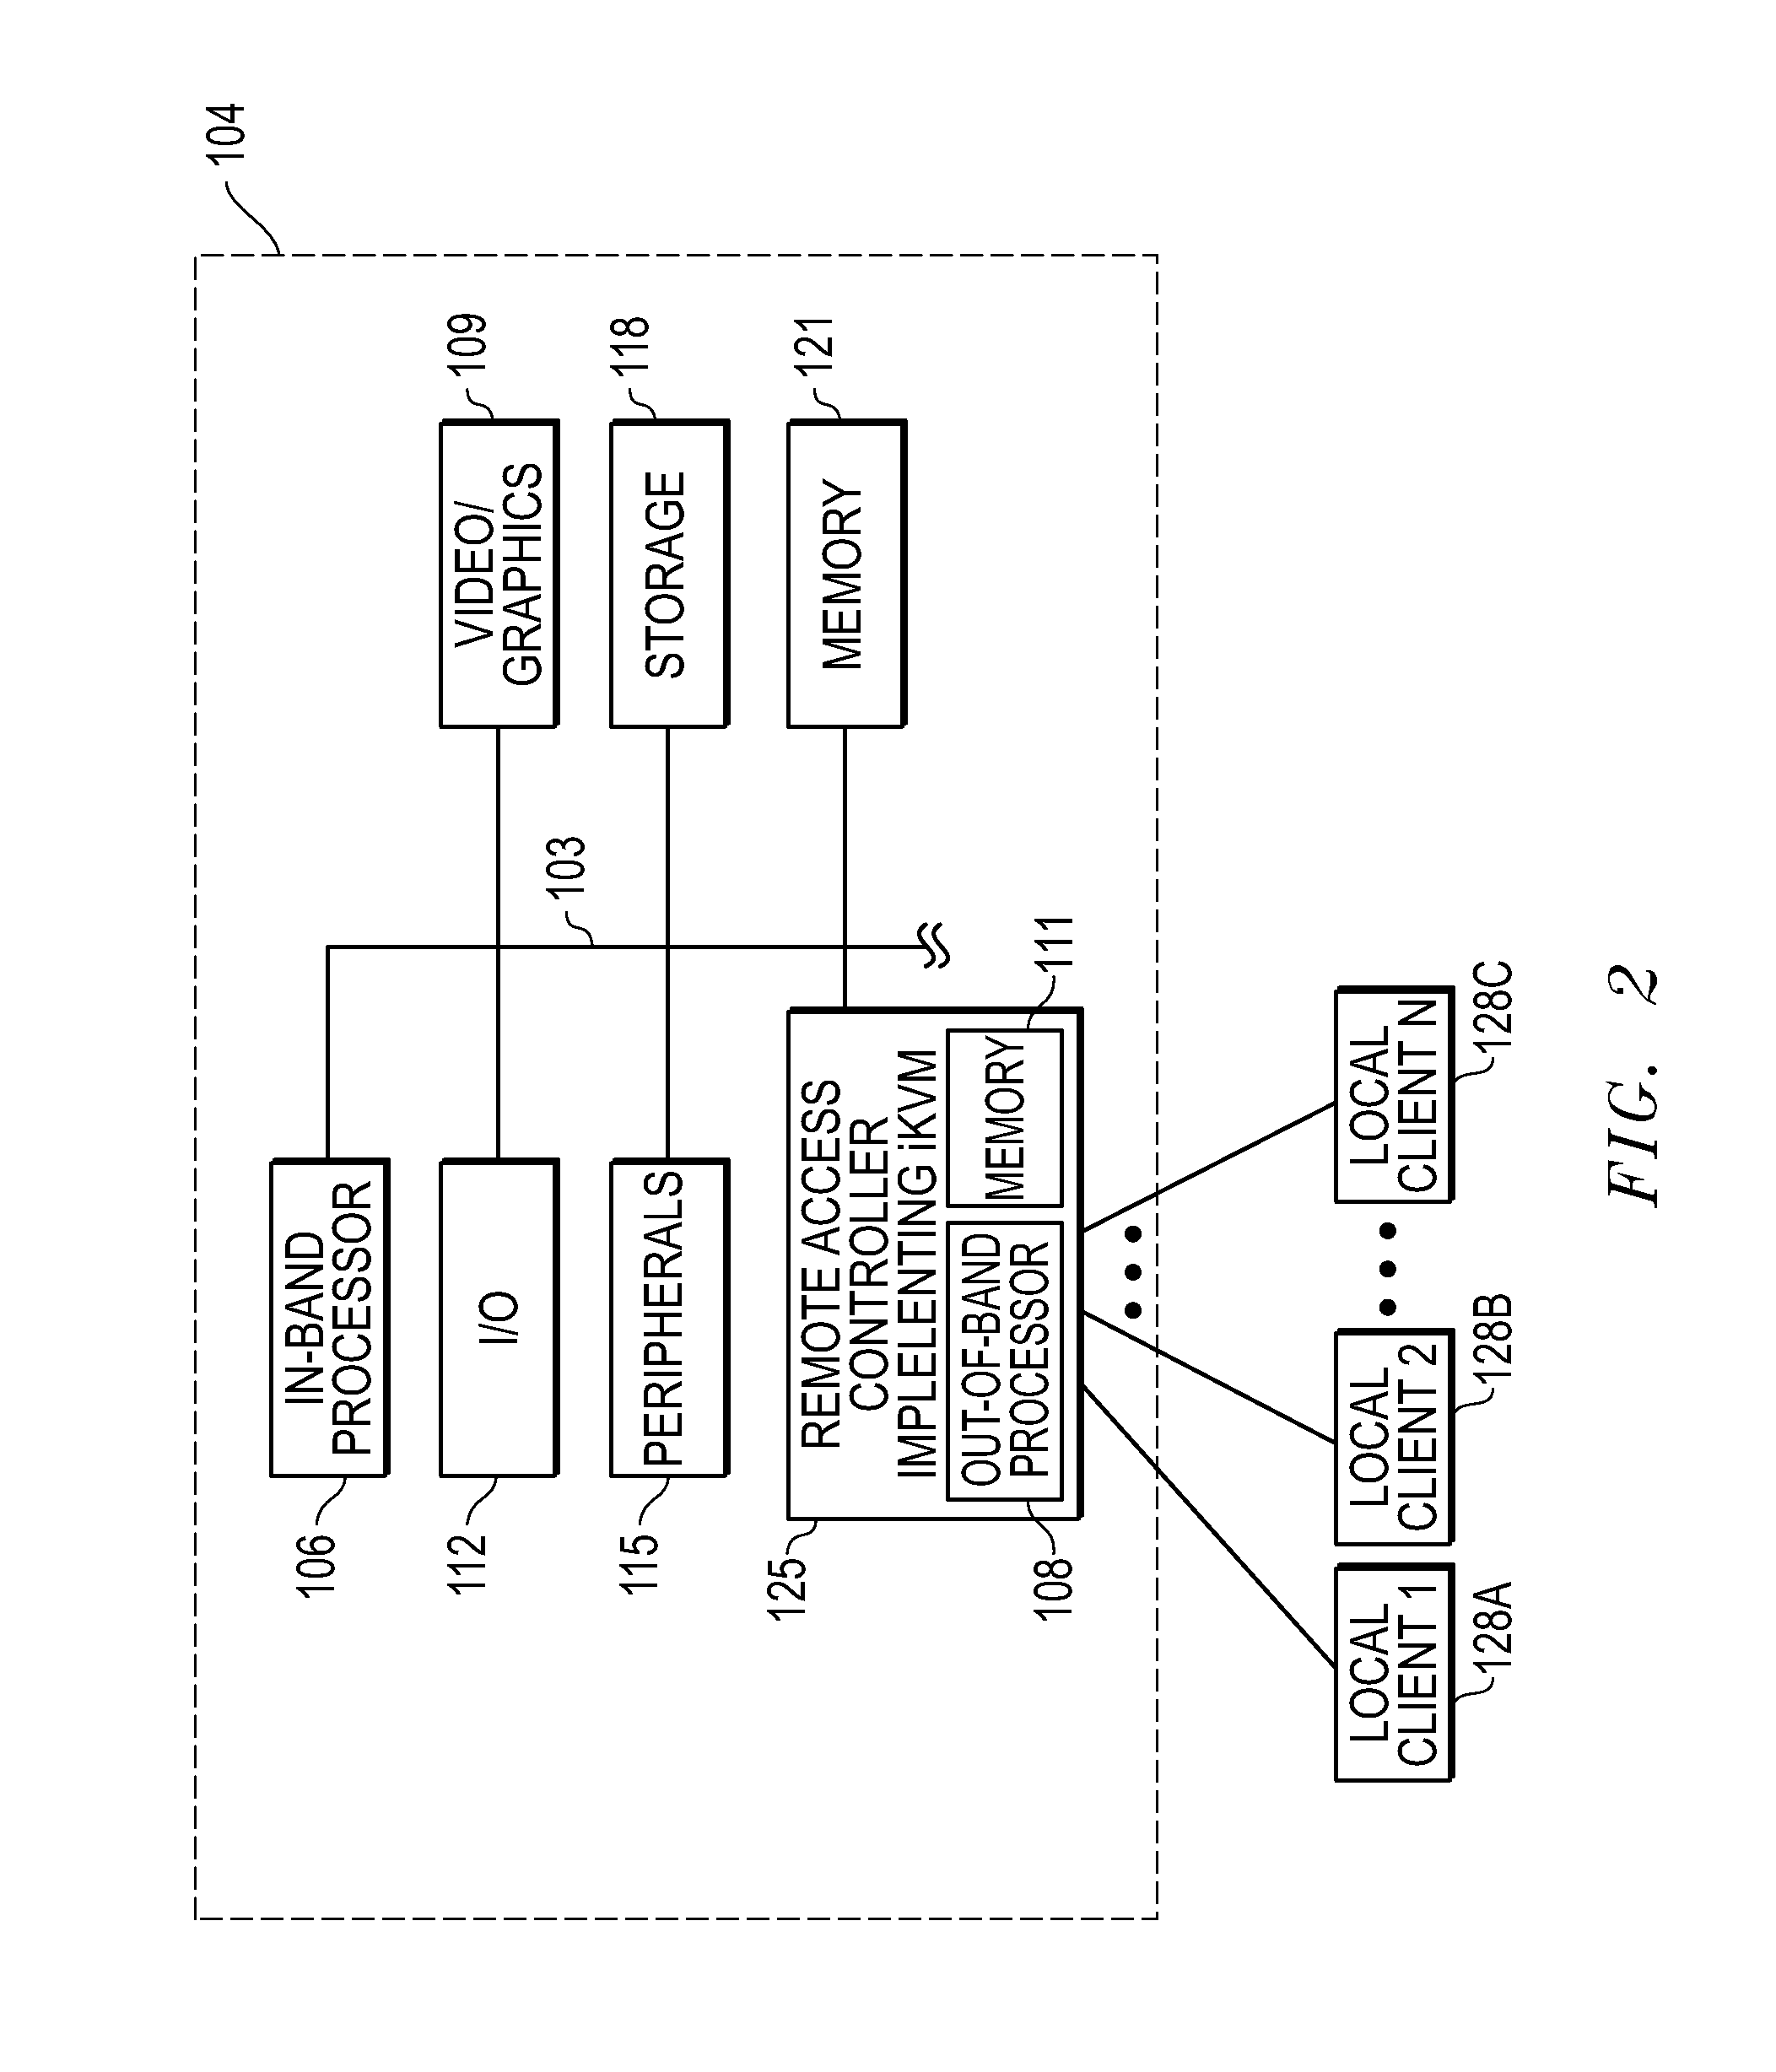 Systems and methods for remote mouse pointer management